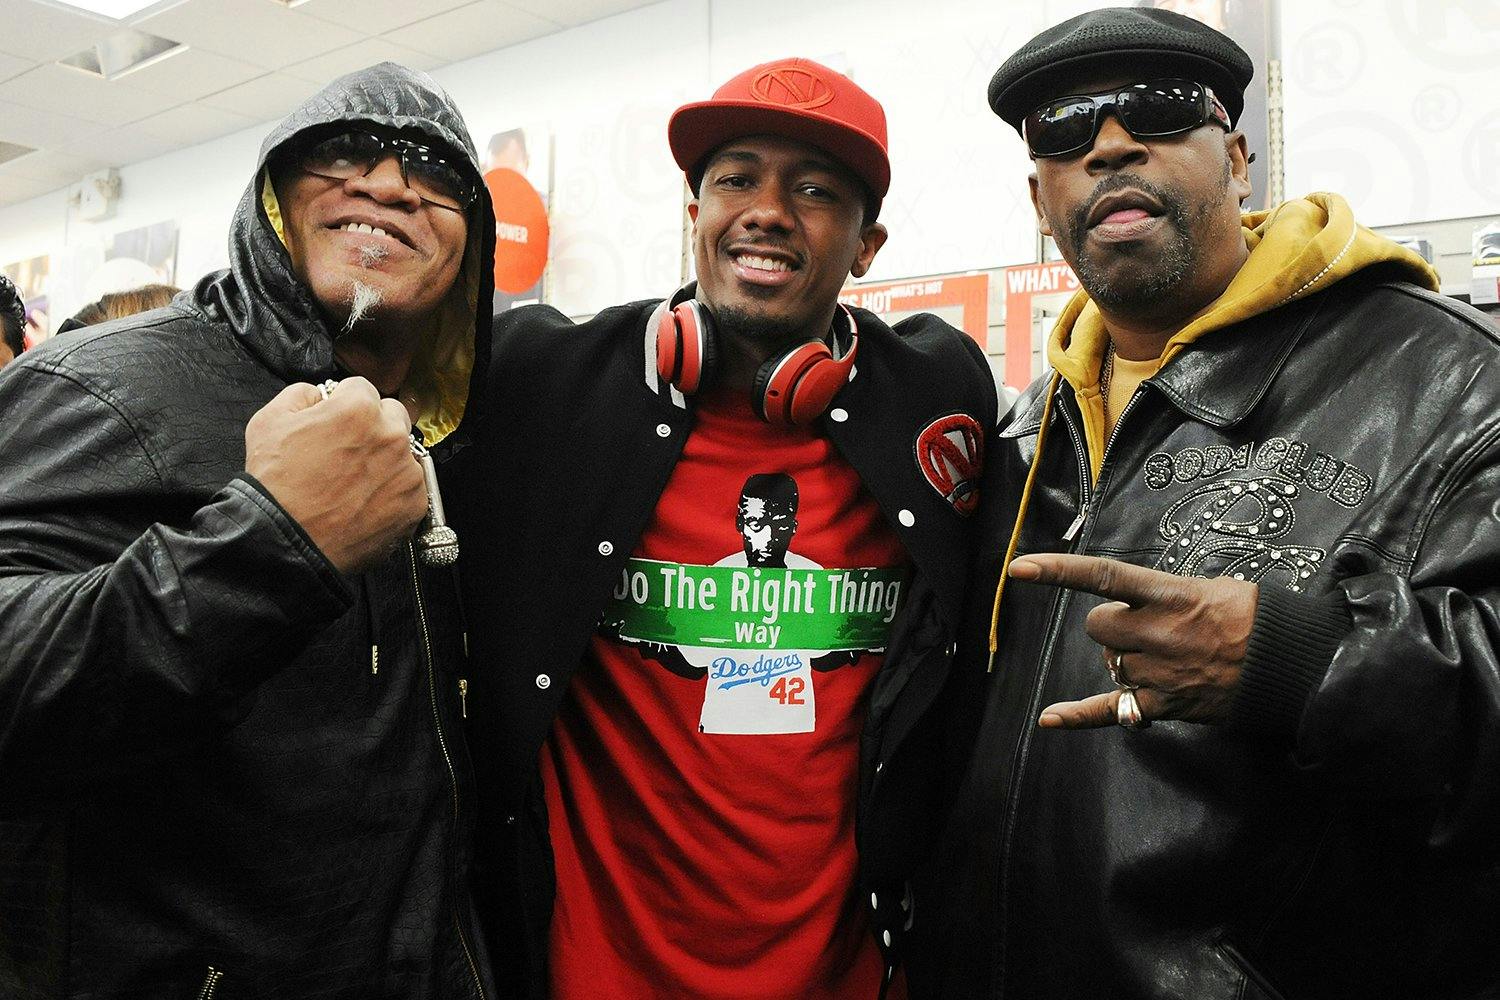 Nick Cannon (C) poses with rappers Melle Mel (L) and Grandmaster Caz during his launch of Ncredible product line at Radioshack on February 23, 2016 in New York City.